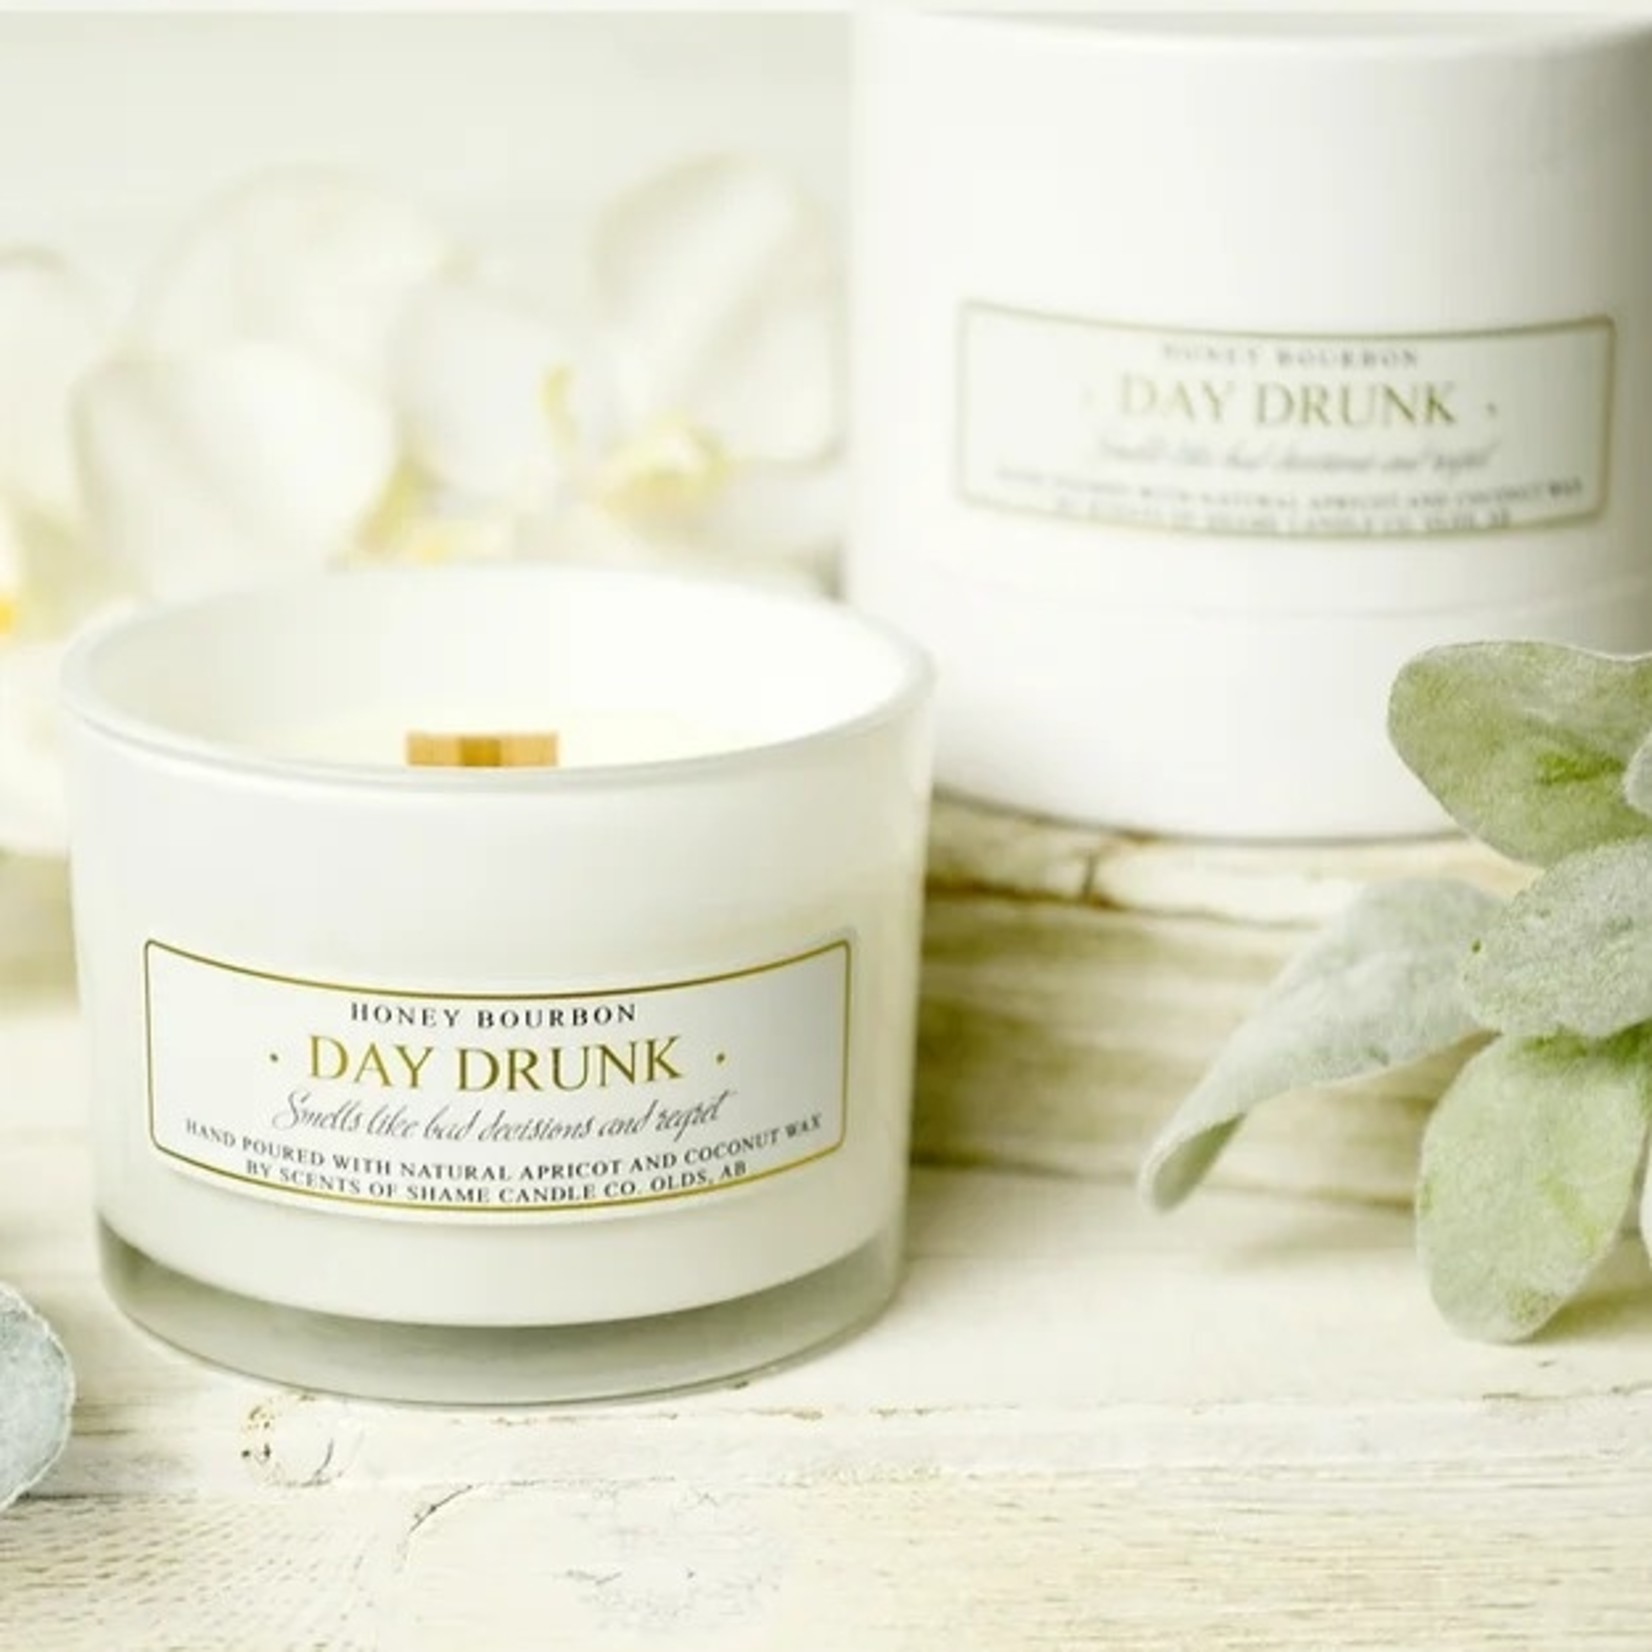 Scents of Shame Candle Company Day Drunk Candle